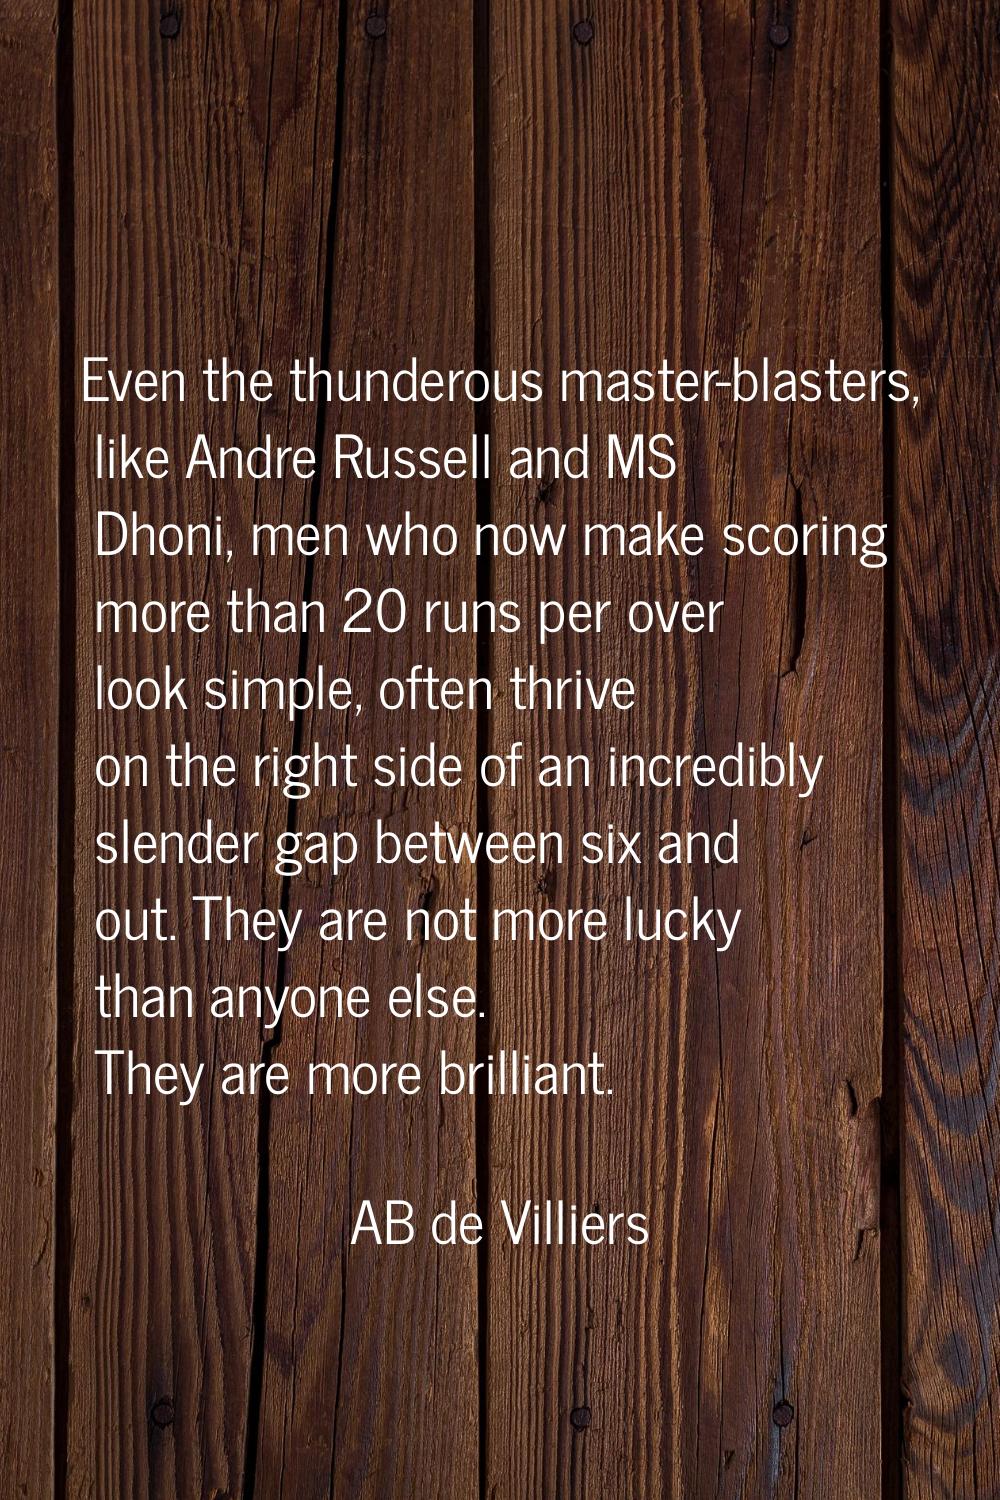 Even the thunderous master-blasters, like Andre Russell and MS Dhoni, men who now make scoring more